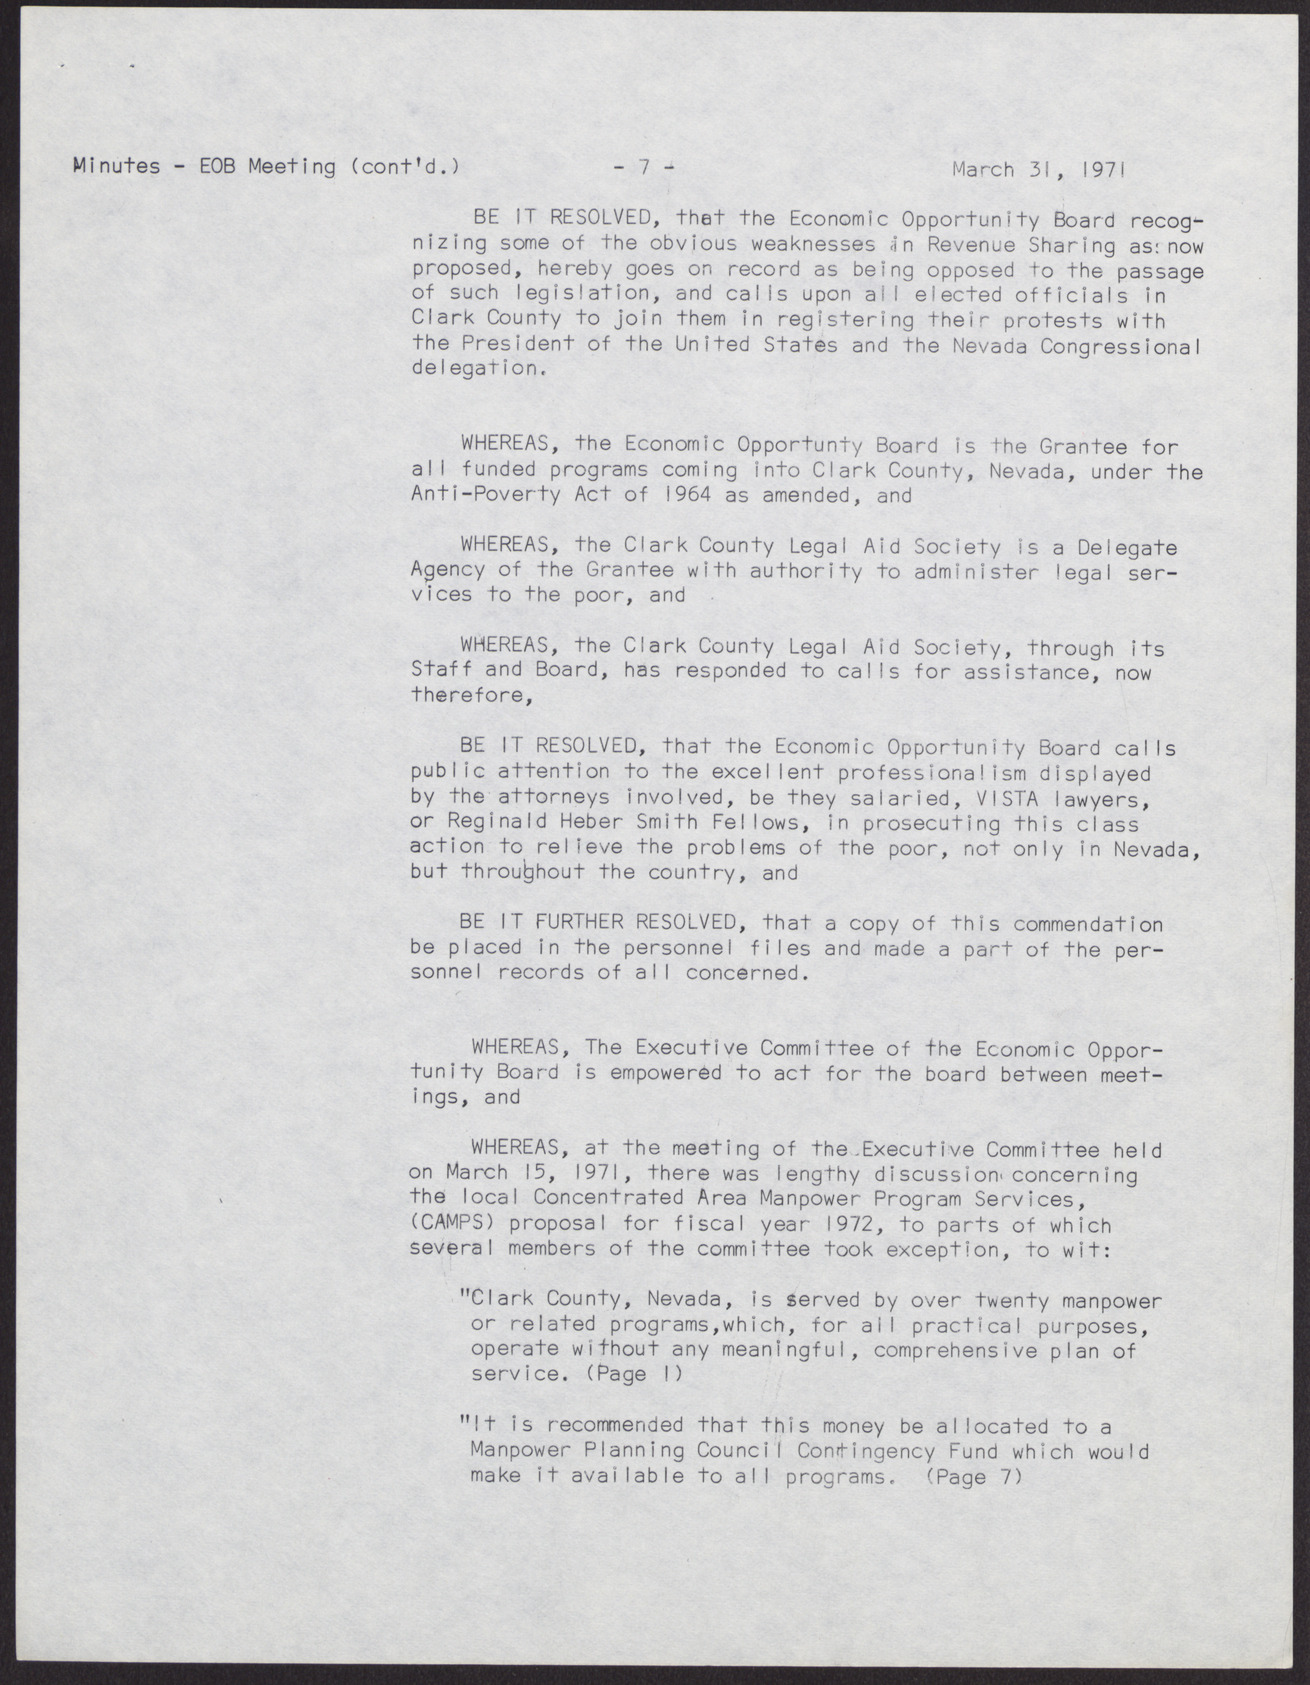 Minutes from Economic Opportunity Board meeting (9 pages), March 31, 1971, page 7